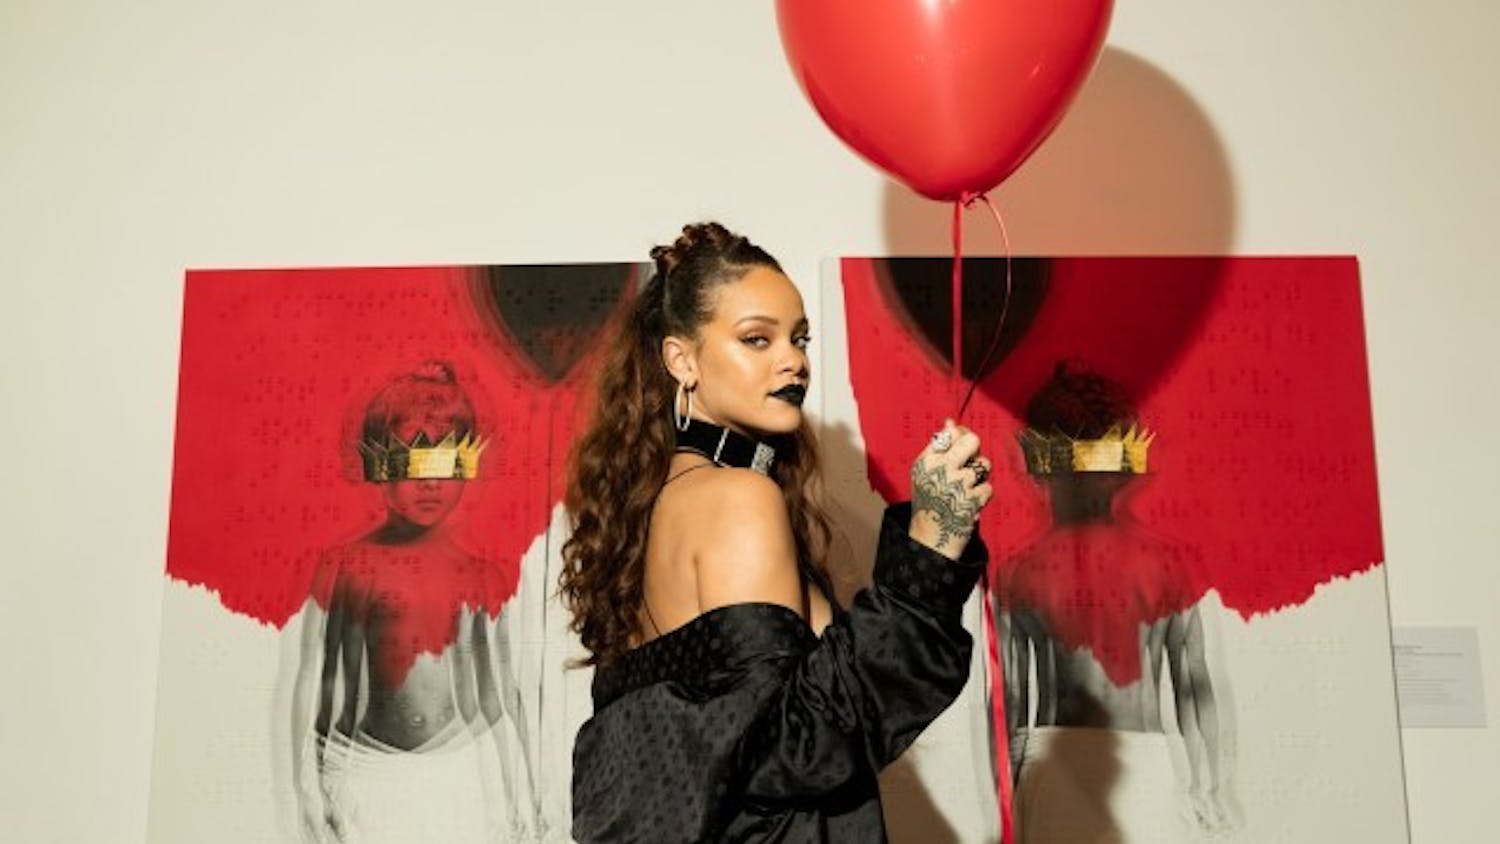 After nearly a four-year absence, 27 year-old Rihanna has returned to the music scene to reclaim her throne as the queen of R&amp;B. (Courtesy of Rihannanow.com)